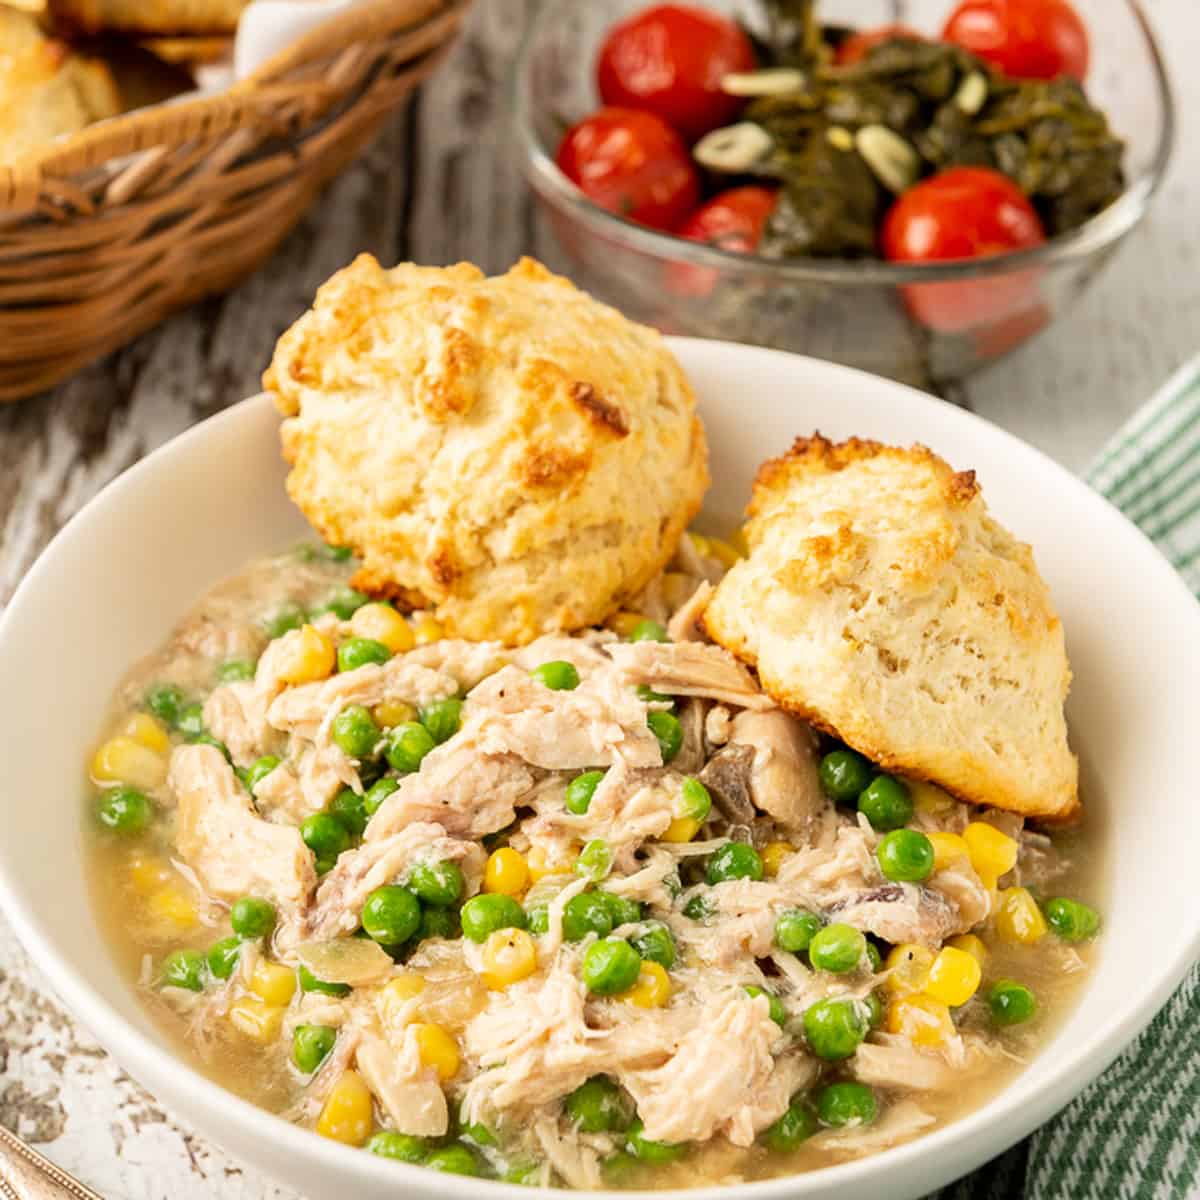 A bowl of chicken and biscuits.